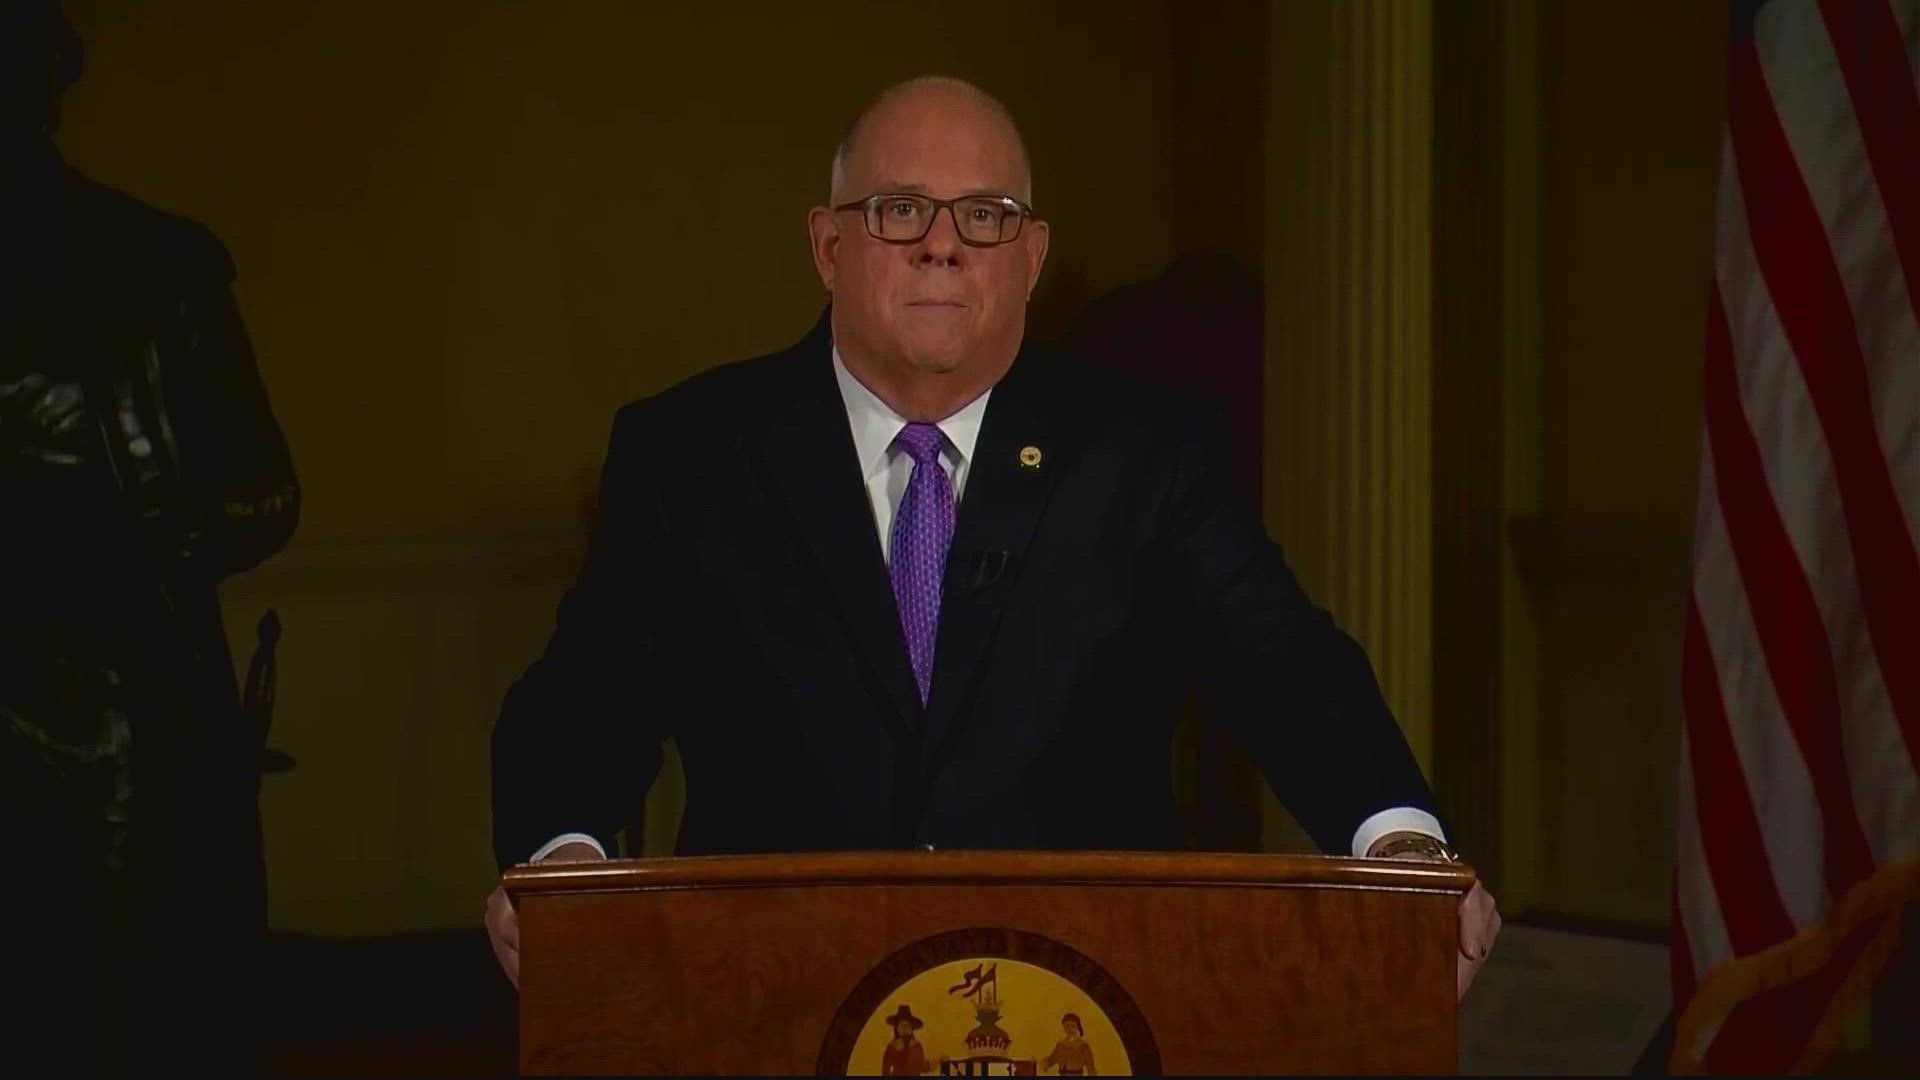 “We have come a long way together over the last eight years changing Maryland for the better,” Hogan said.